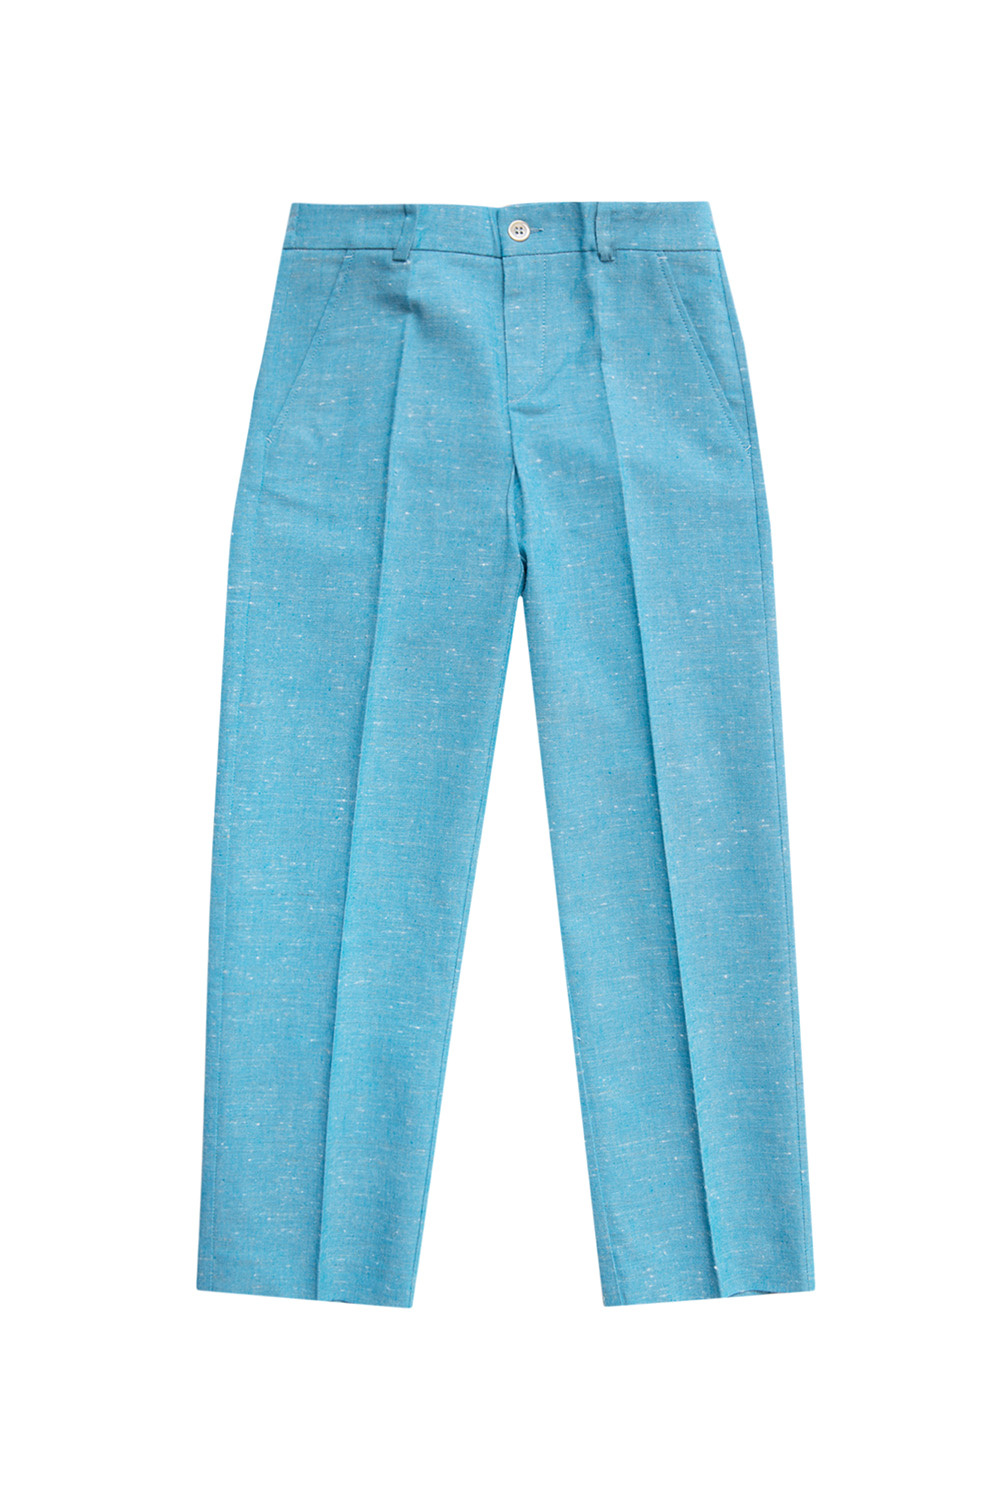 Gucci Kids Pleat-front Neck trousers